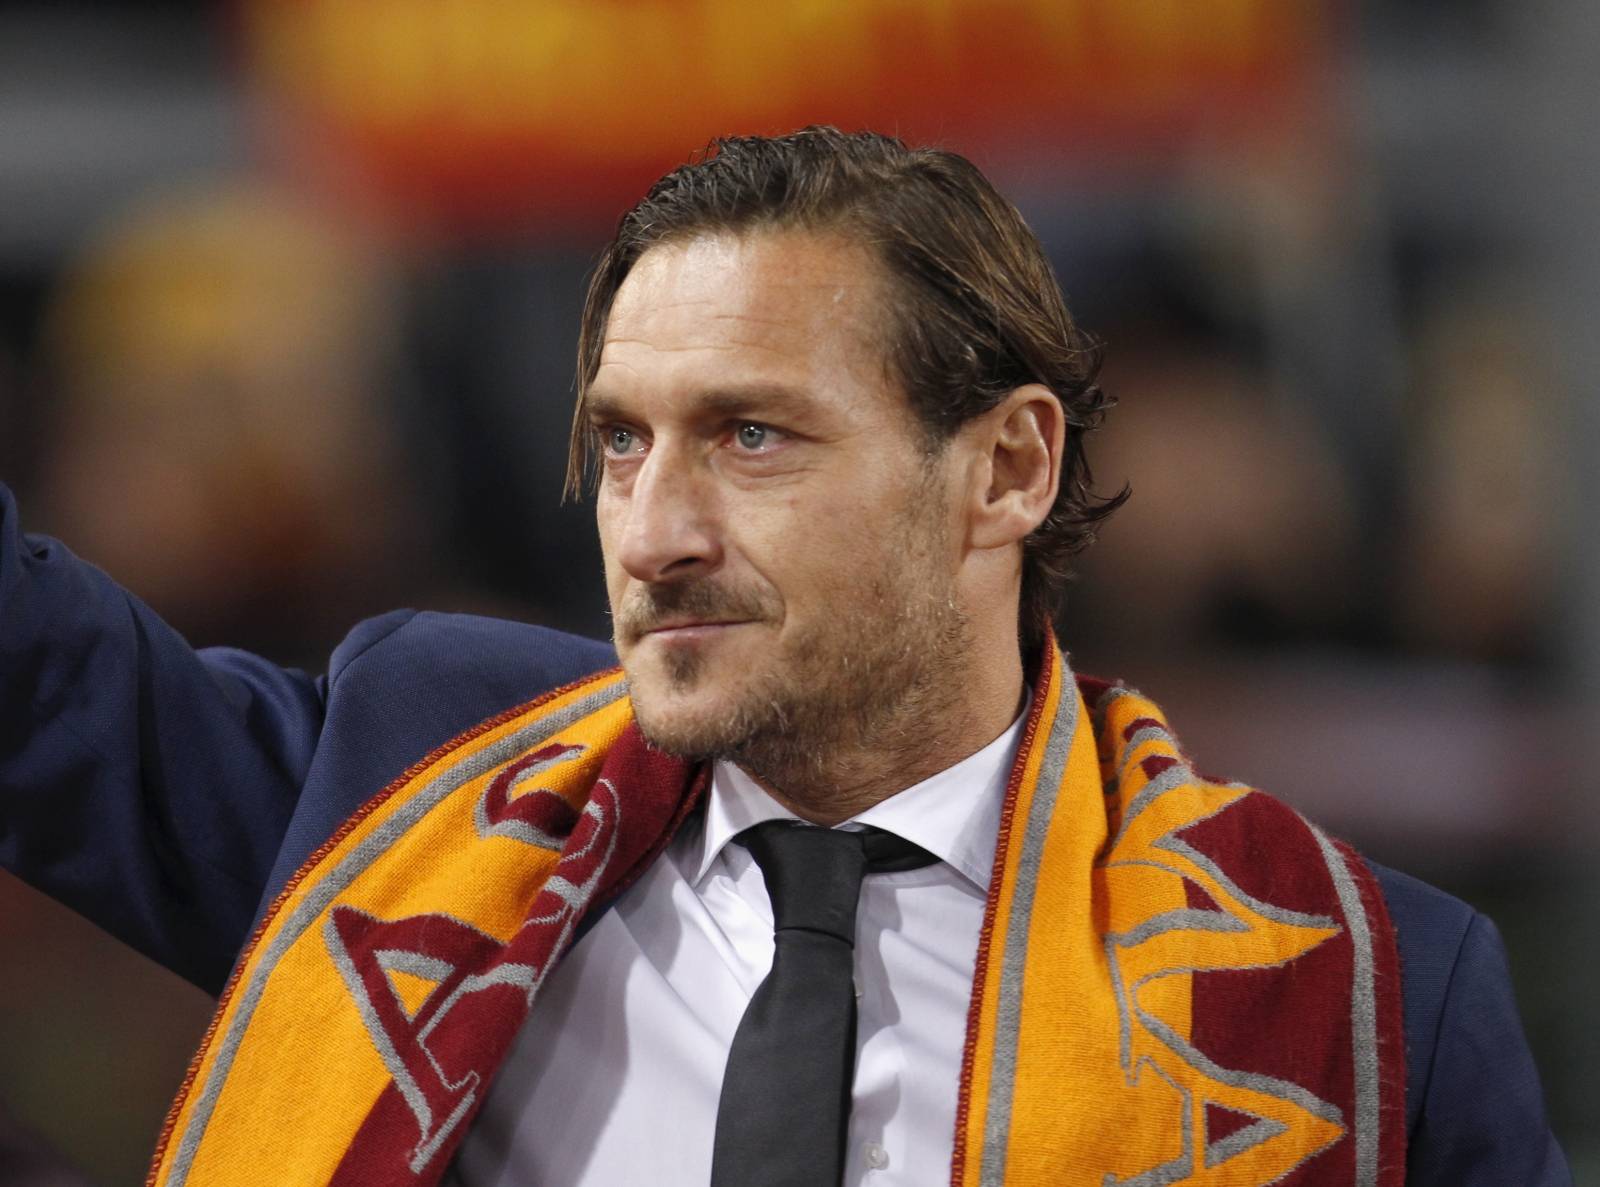 Francesco Totti celebrates the entry in the Hall of Fame of the football club AS Roma